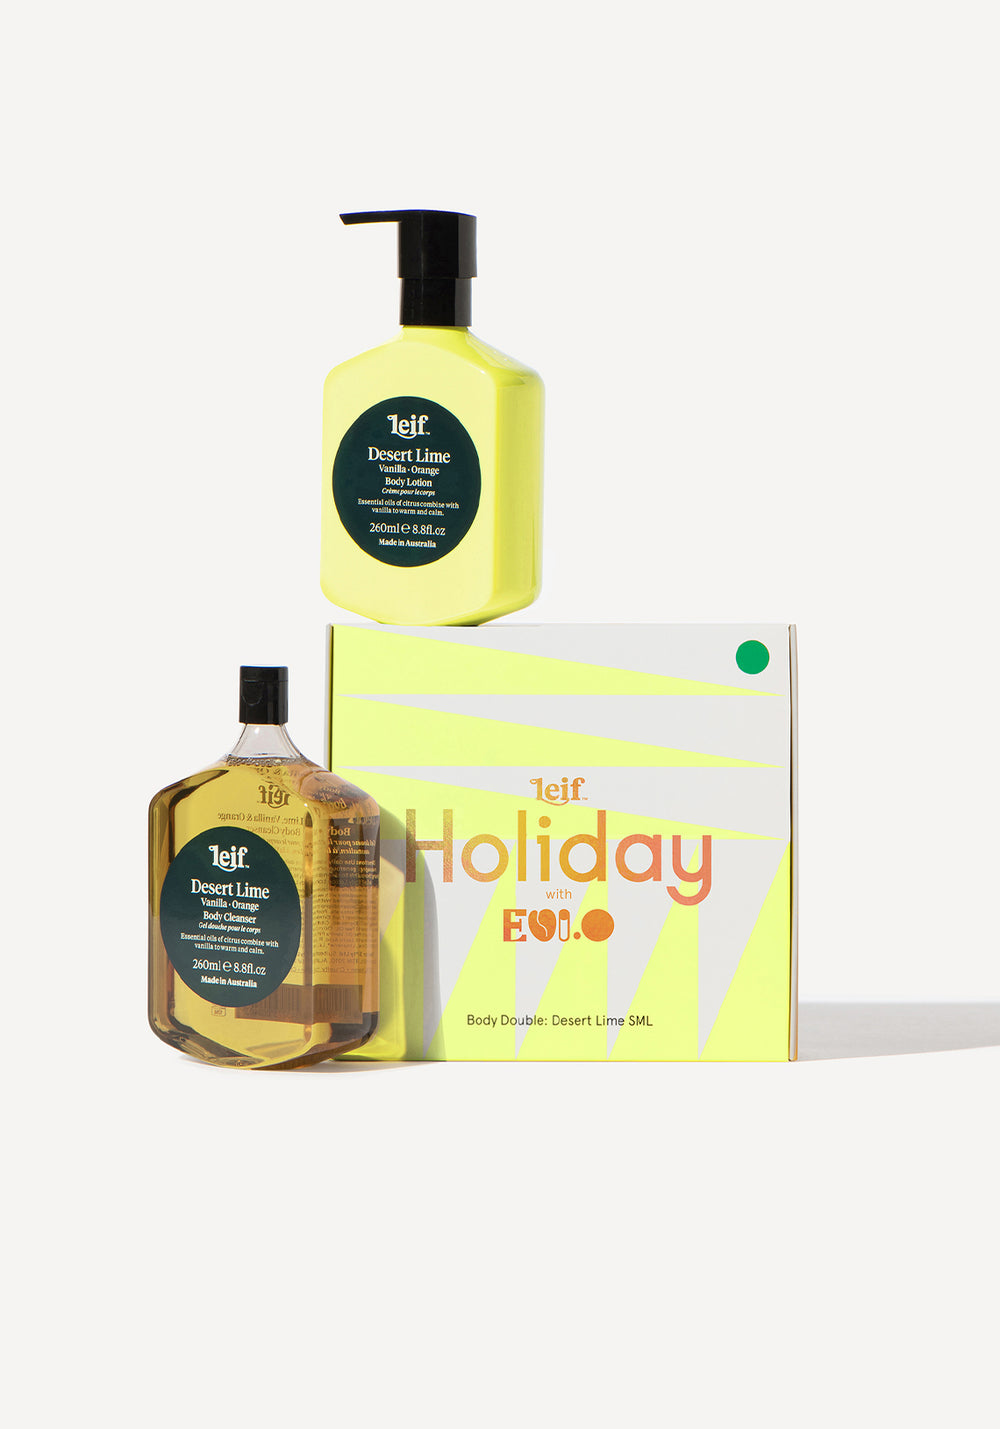 LIMITED EDITION 'HOLIDAY WITH EVI O' BODY DOUBLE DESERT LIME SML